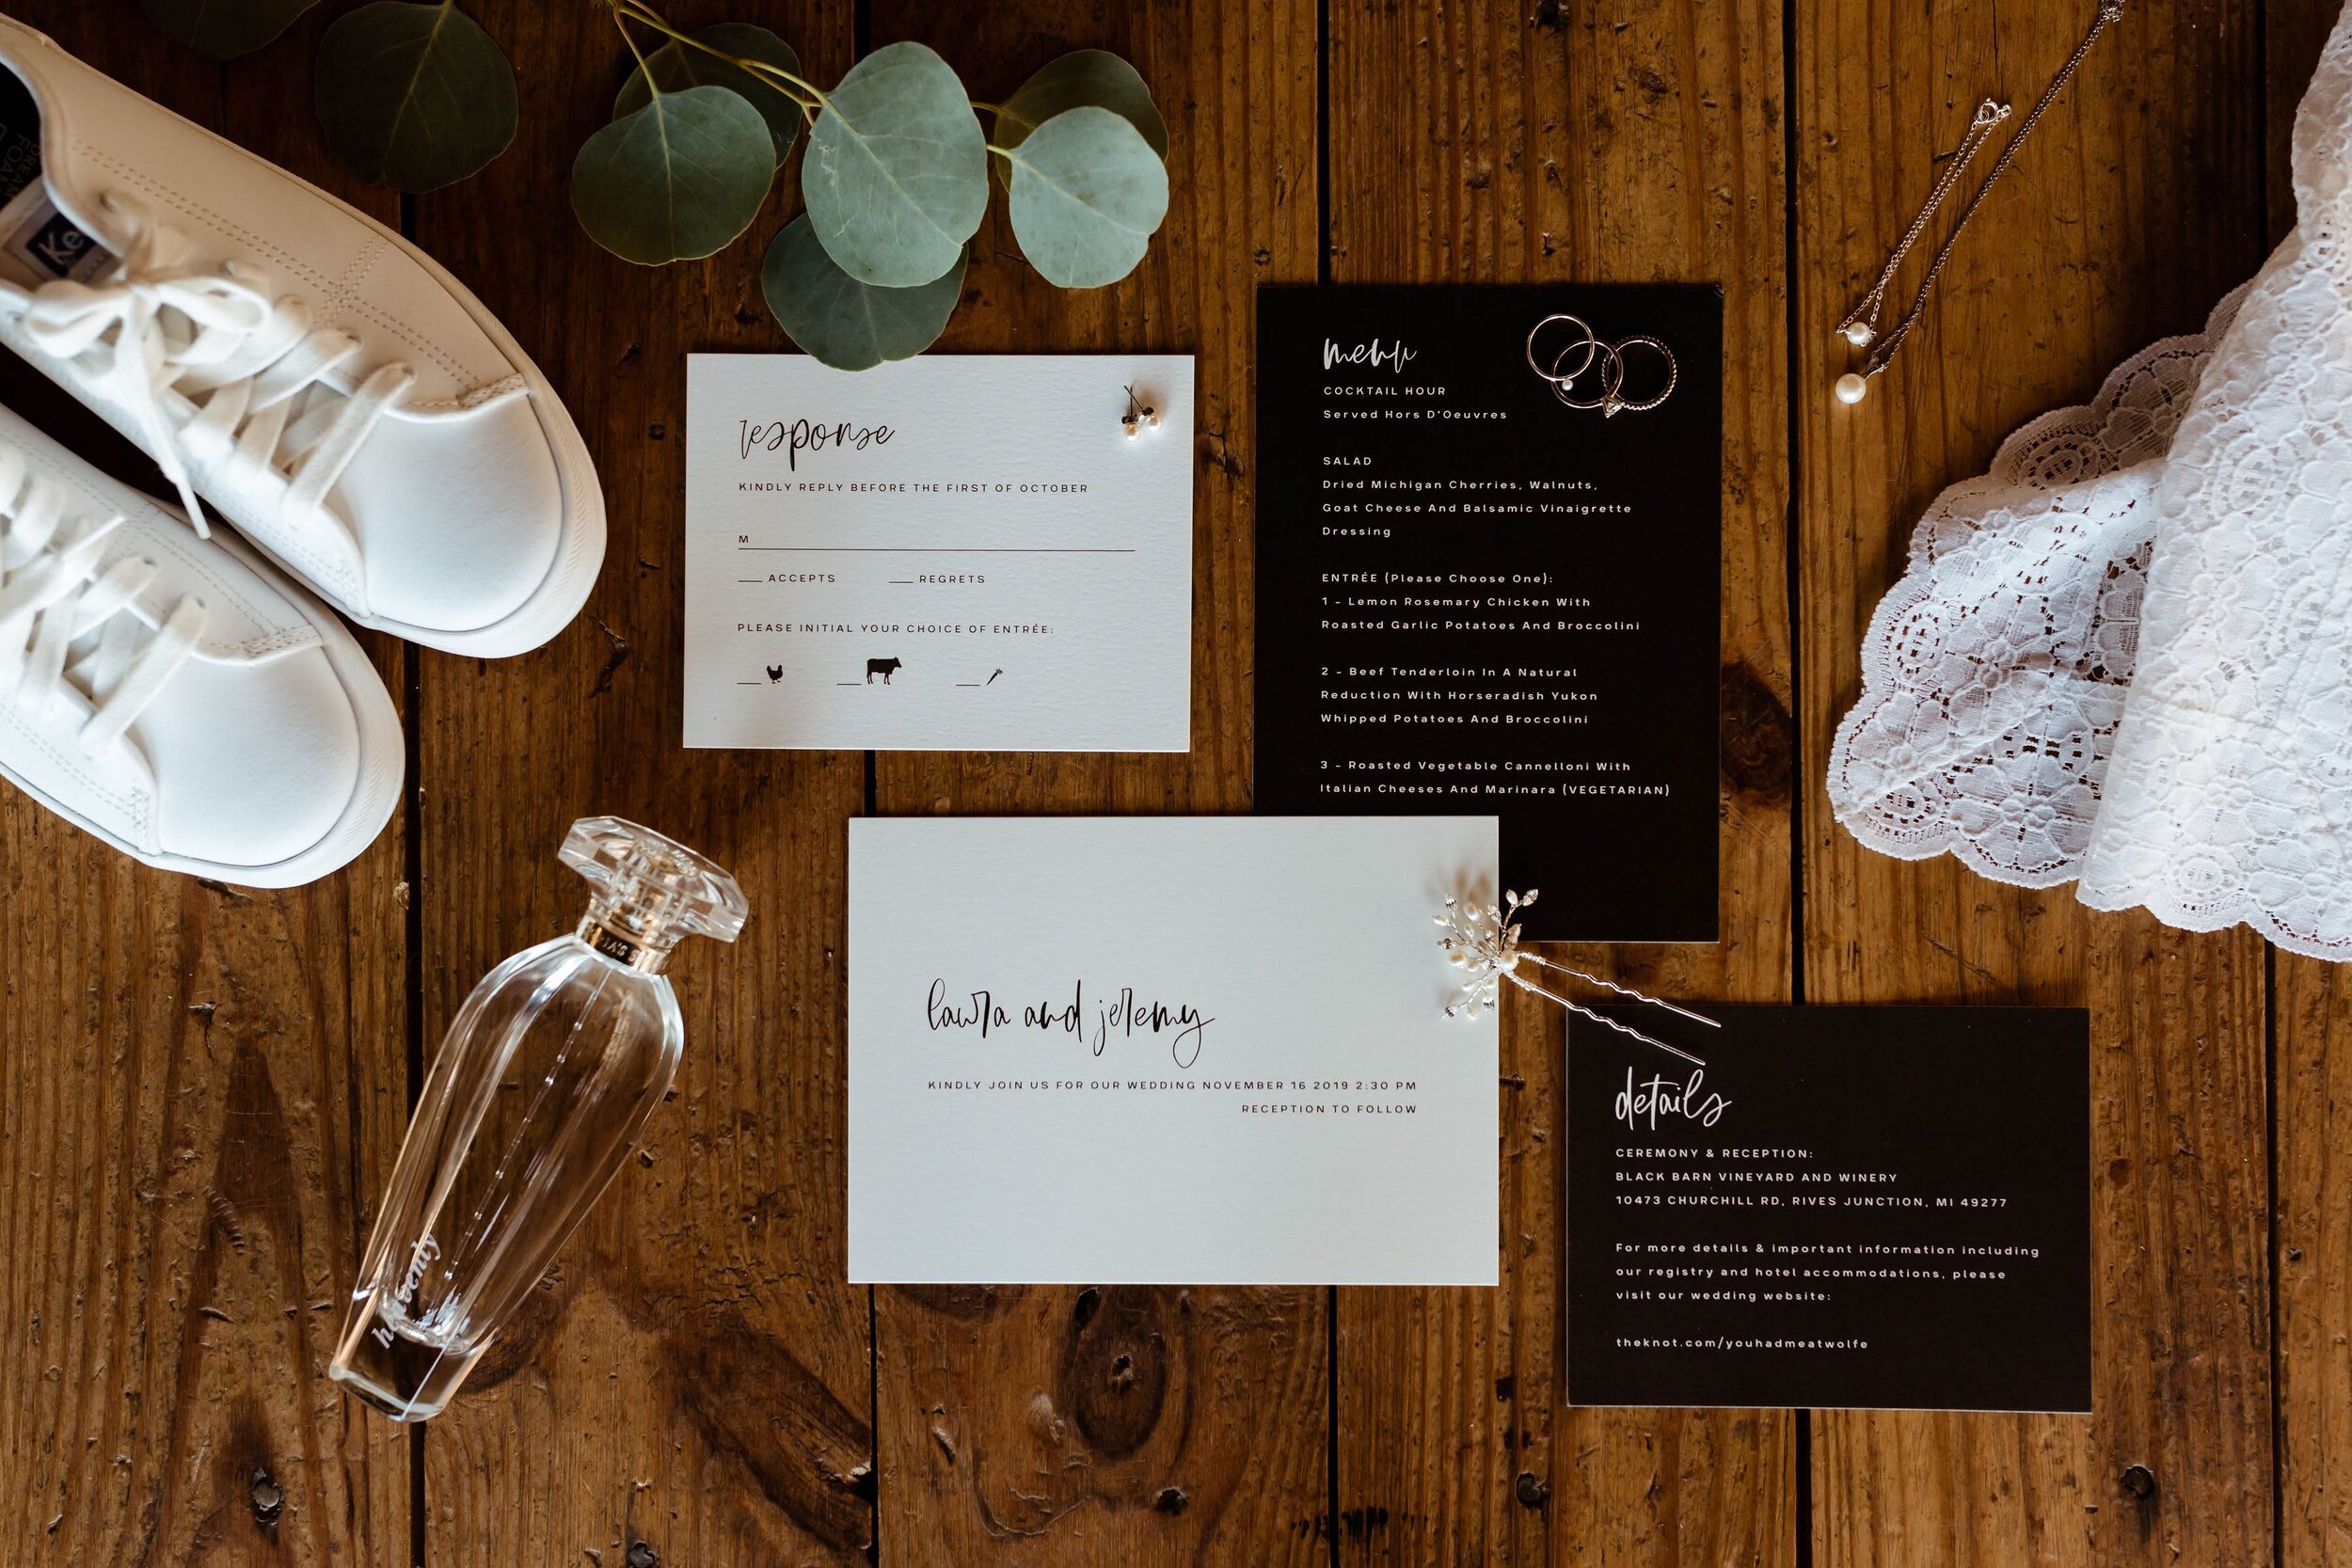 Laura and Jeremy’s invitation suite perfectly set the vibe and style for their day.